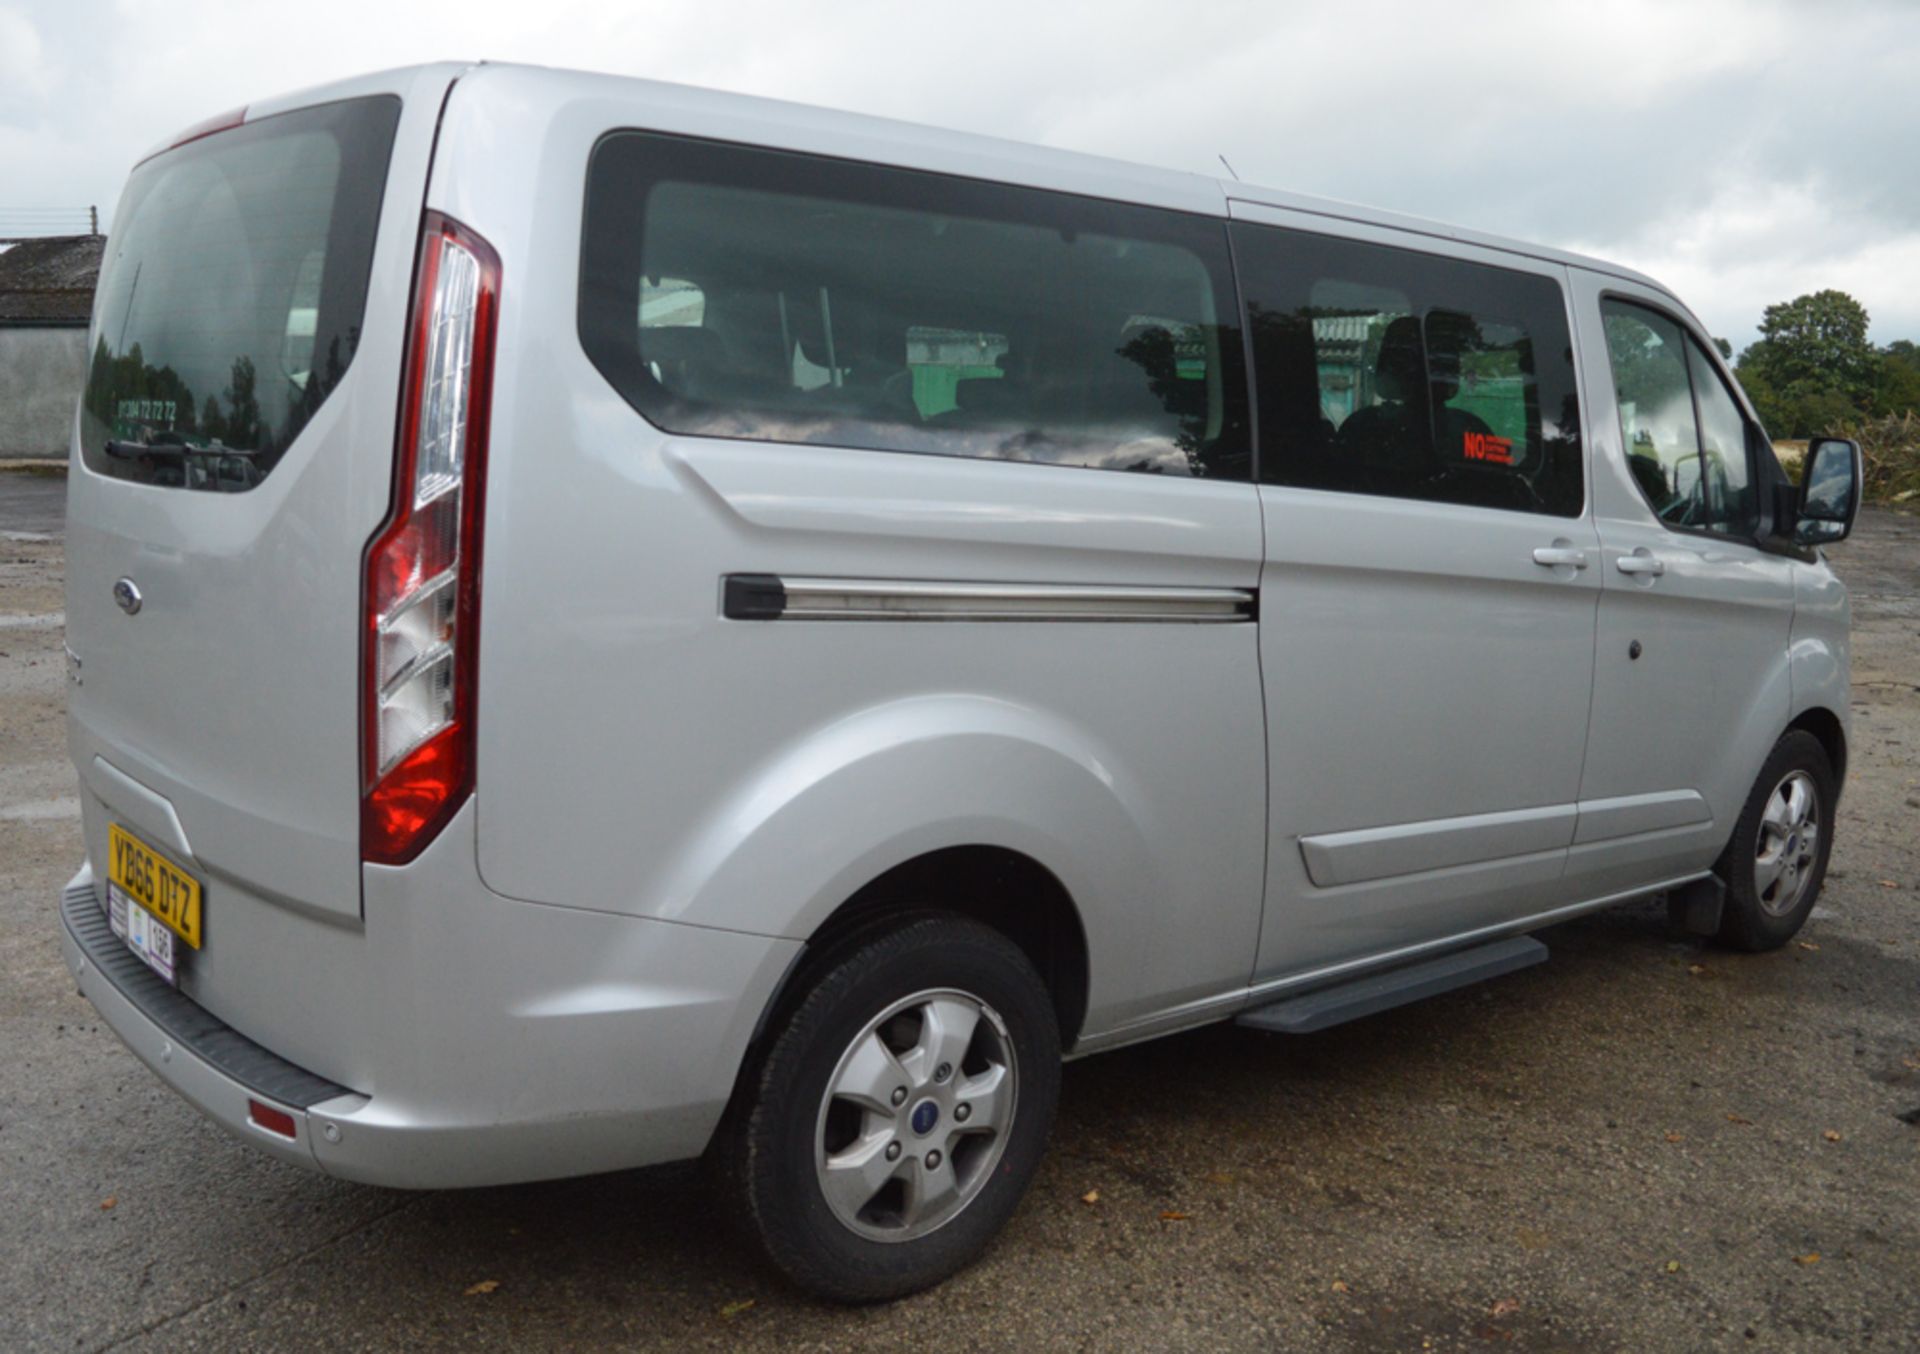 Ford Tourneo Custom 8 seat minibus  Registration Number: YD66 DTZ Date of Registration: 01/09/2016 - Image 2 of 12